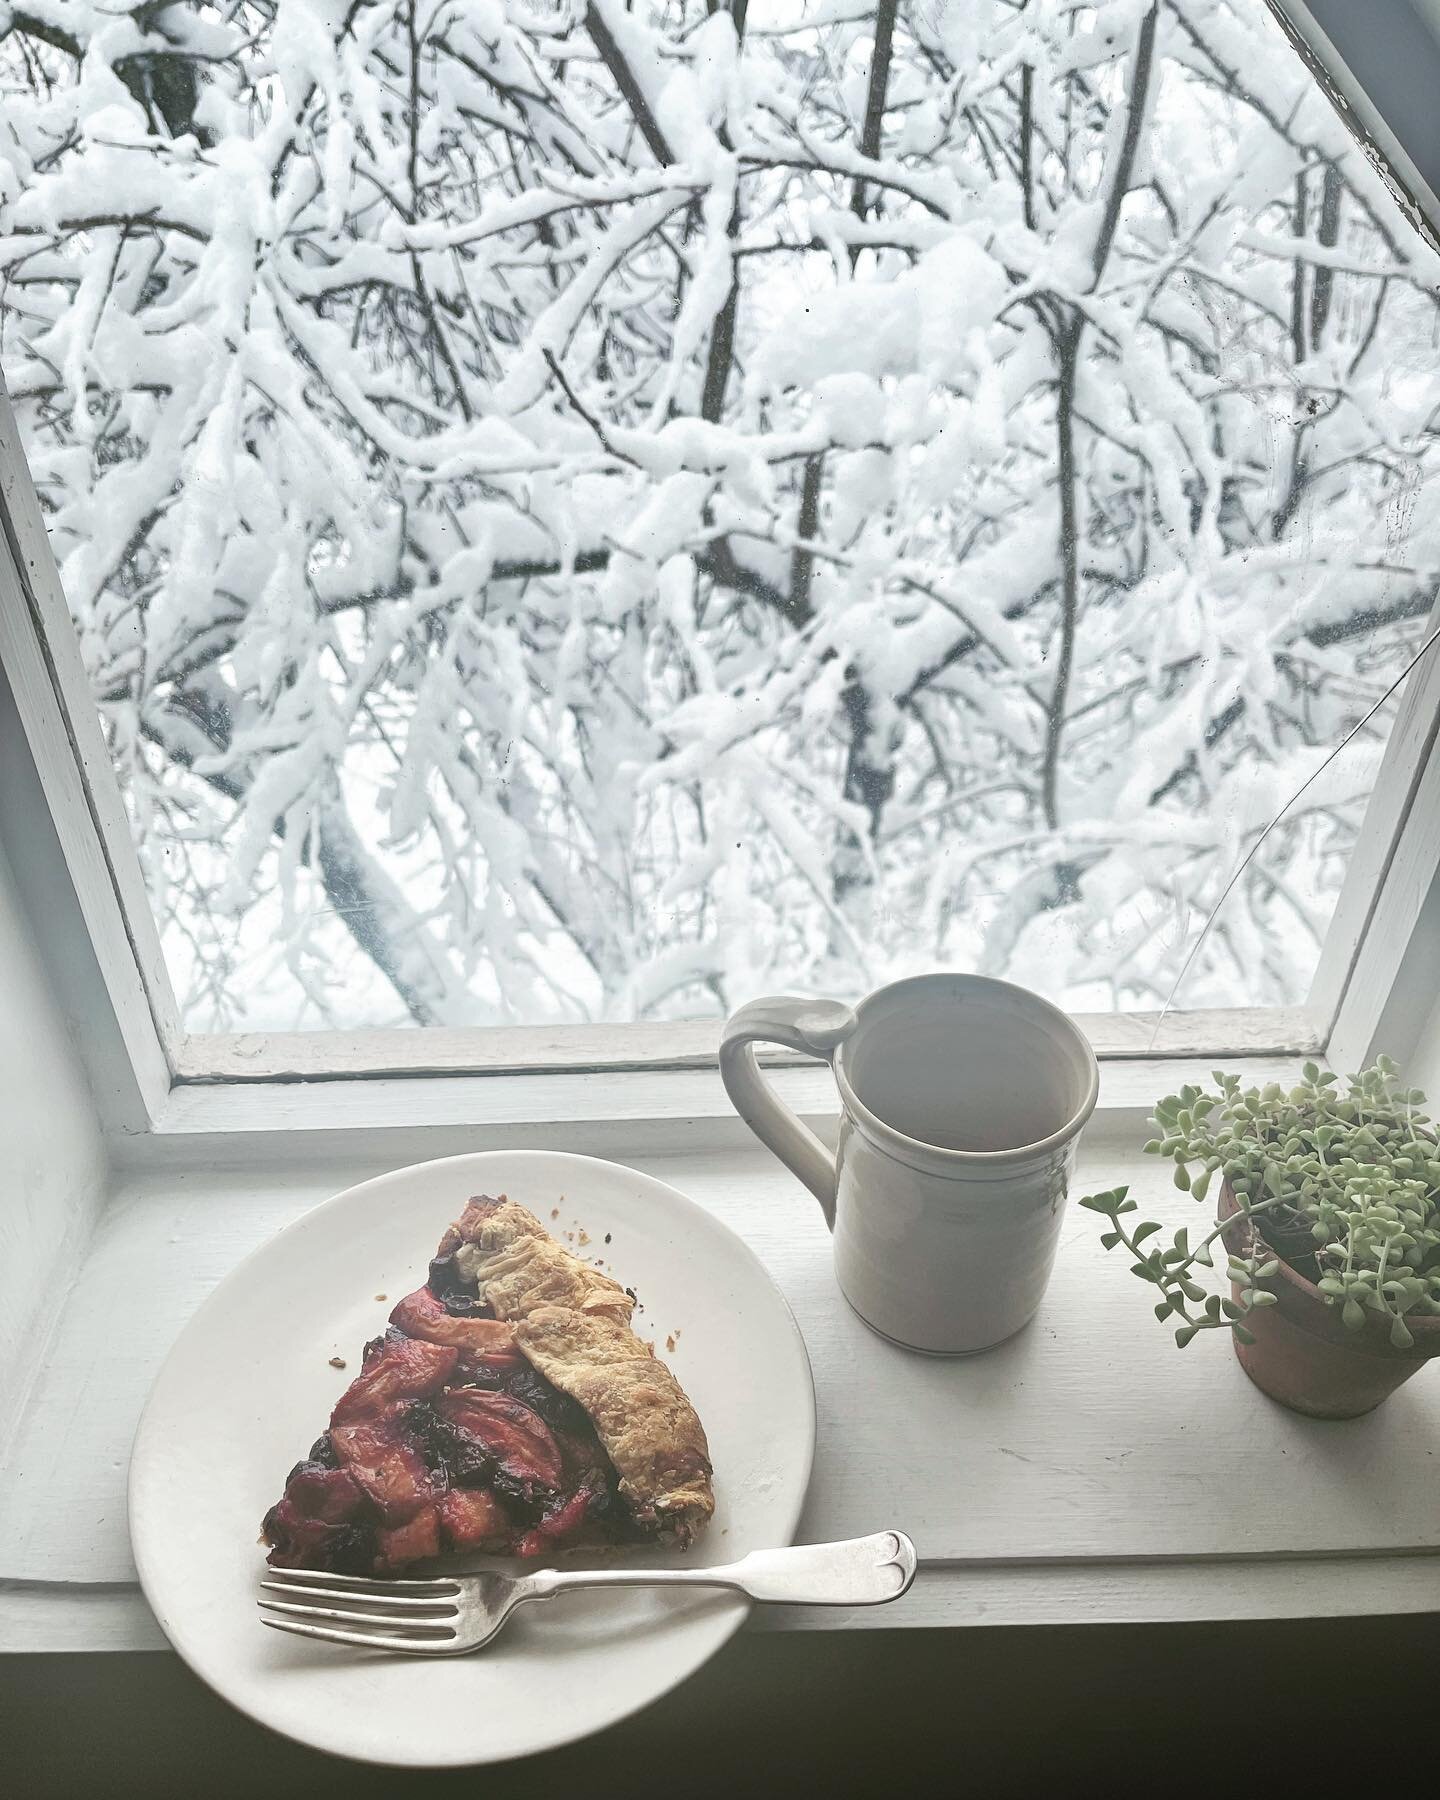 when pi day falls on a snow day, the holiday feels extra sweet 🤍
i almost never bake at home anymore, but this thick blanket of snow over the catskills today gave me the perfect opportunity to cozy in, slow down, dig some summer fruit from the back 